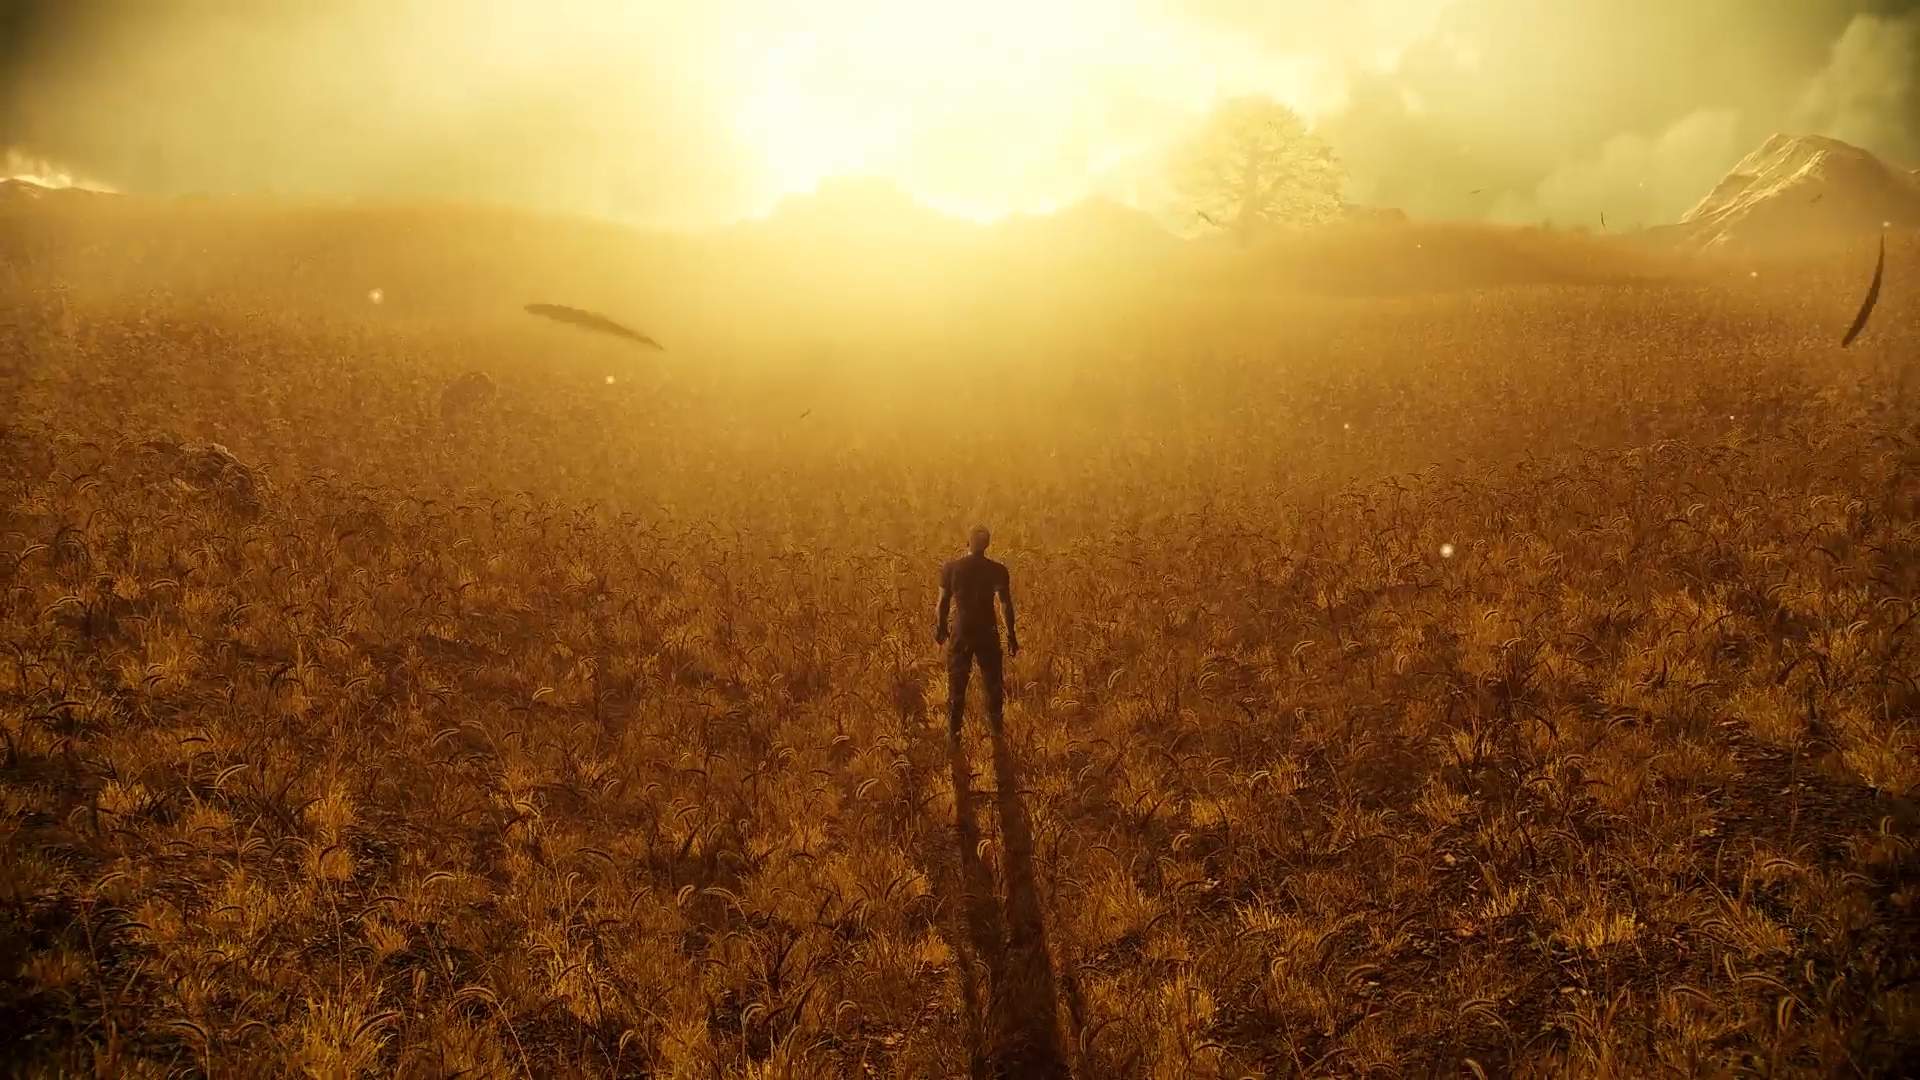 Jack stands in a sun-drenched wheat field.